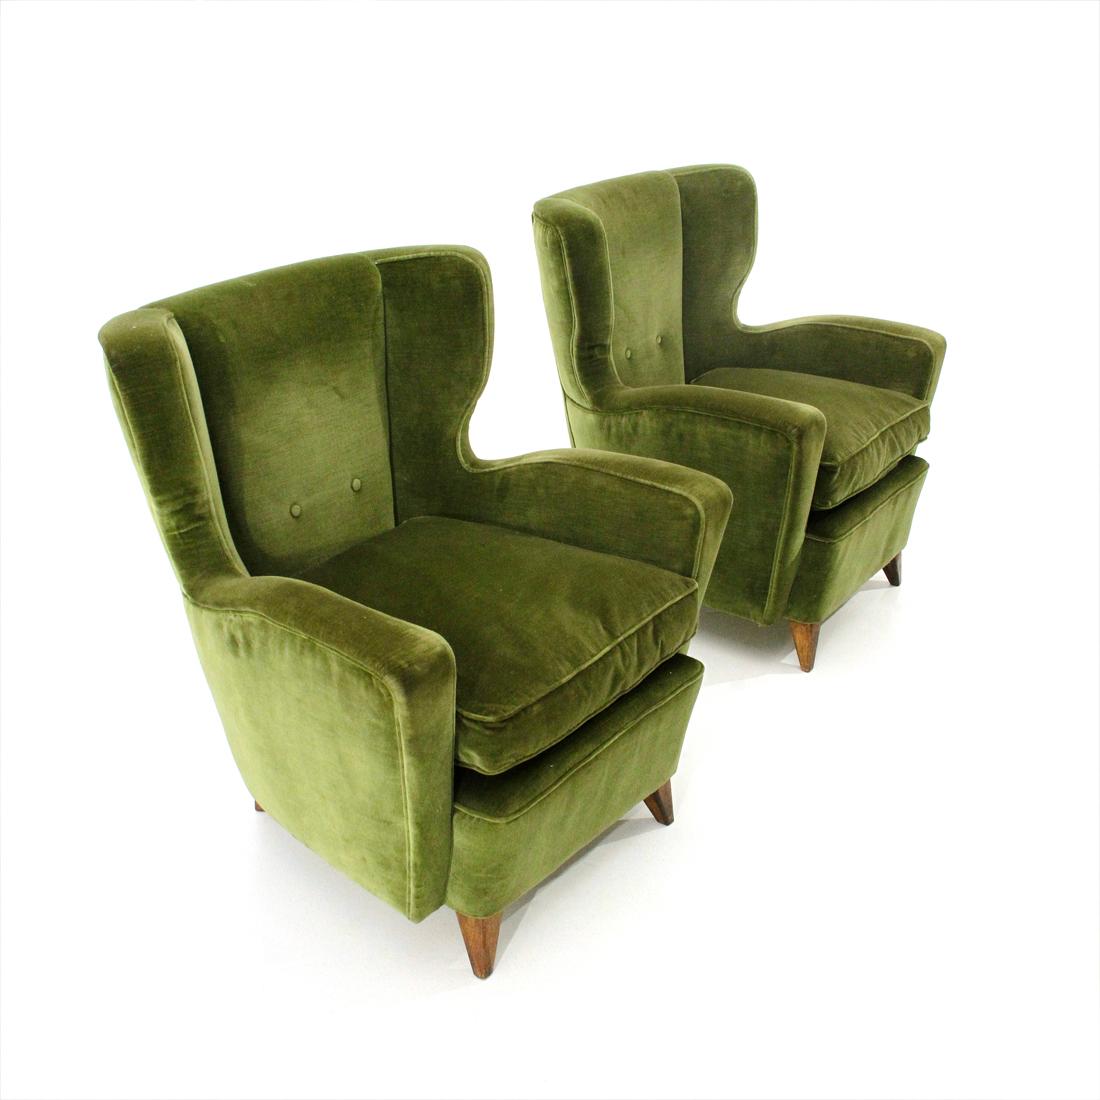 Pair of Italian manufactures armchairs produced in the 1950s.
Wooden structure padded and lined with green velvet, original of the era.
Padded cushion.
Feet in shaped wood.
Good general conditions, some signs due to normal use over